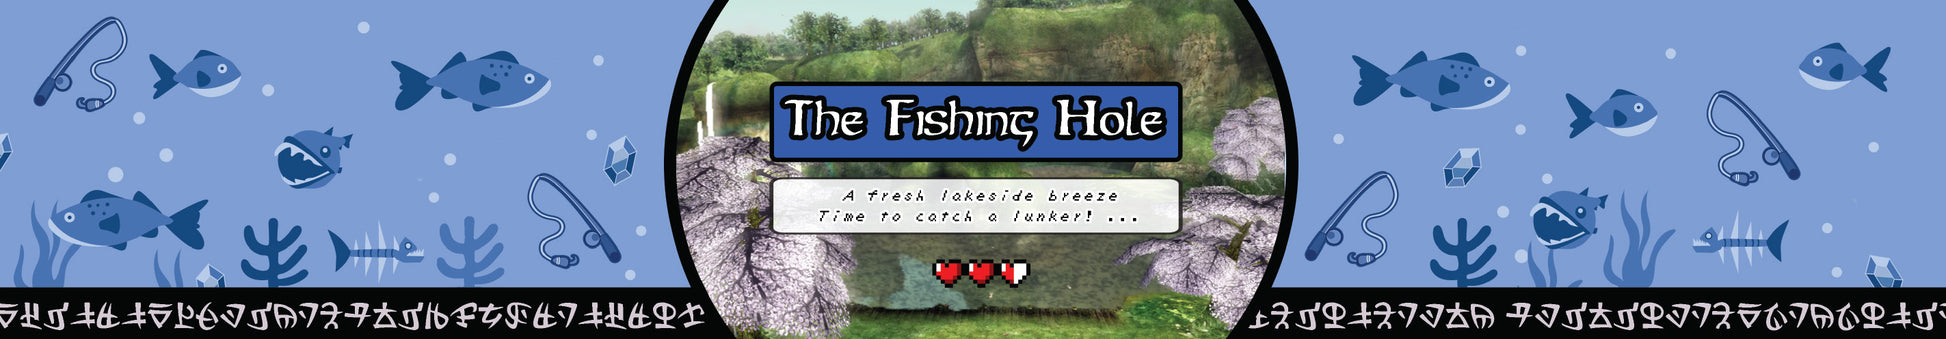 The Fishing Hole Zelda inspired scented candle label design by Happy Piranha.